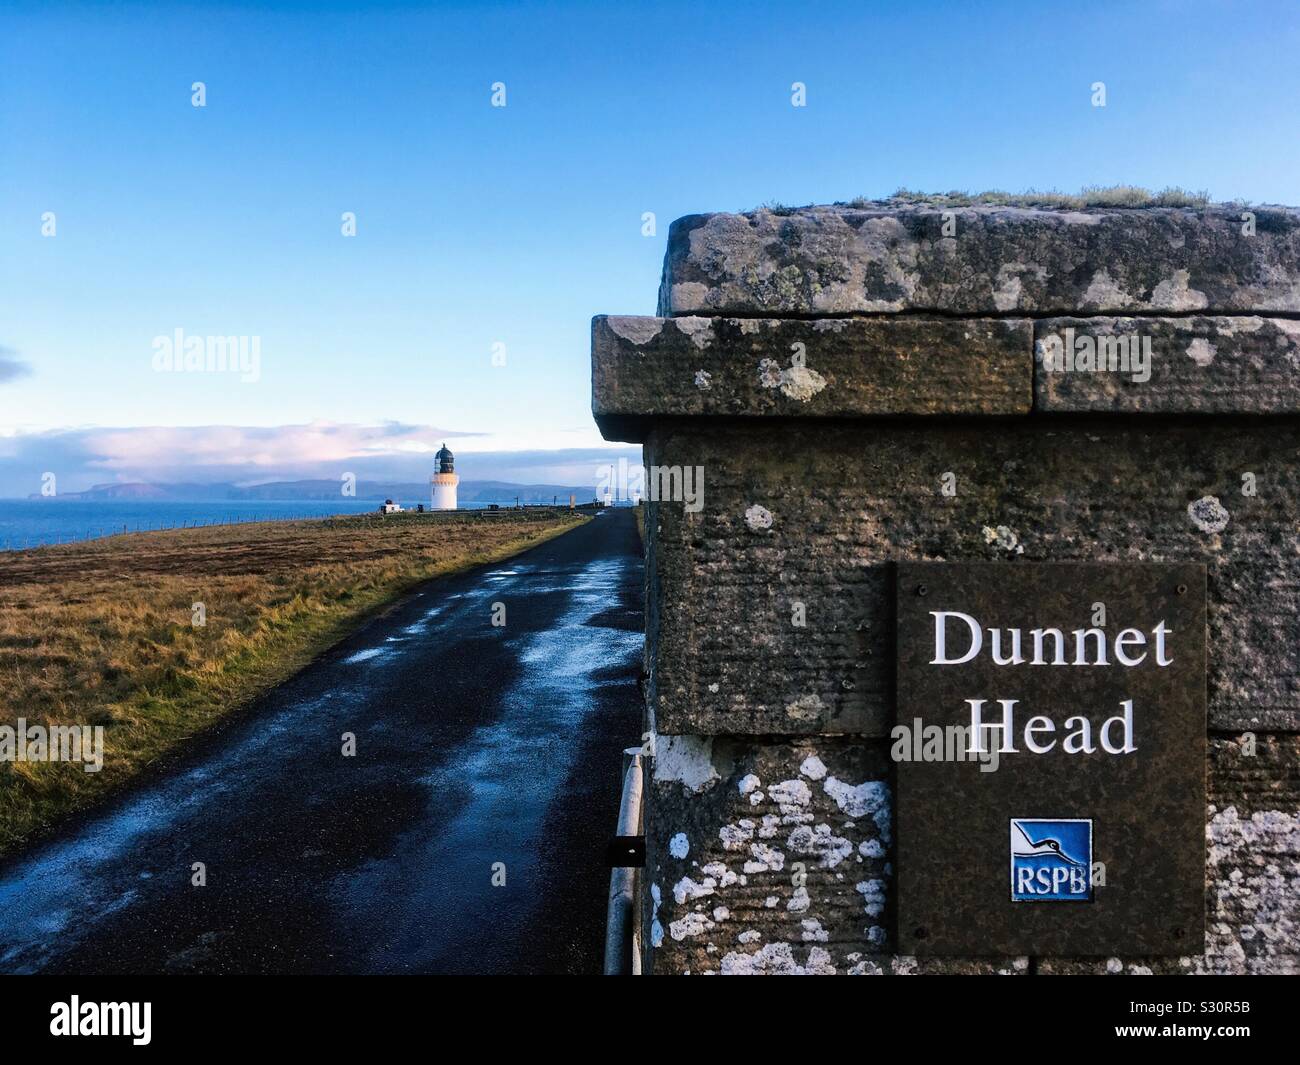 Dunnet Head, Caithness, Scotland. An RSPB nature reserve, lighthouse and the most northerly point on mainland Britain Stock Photo